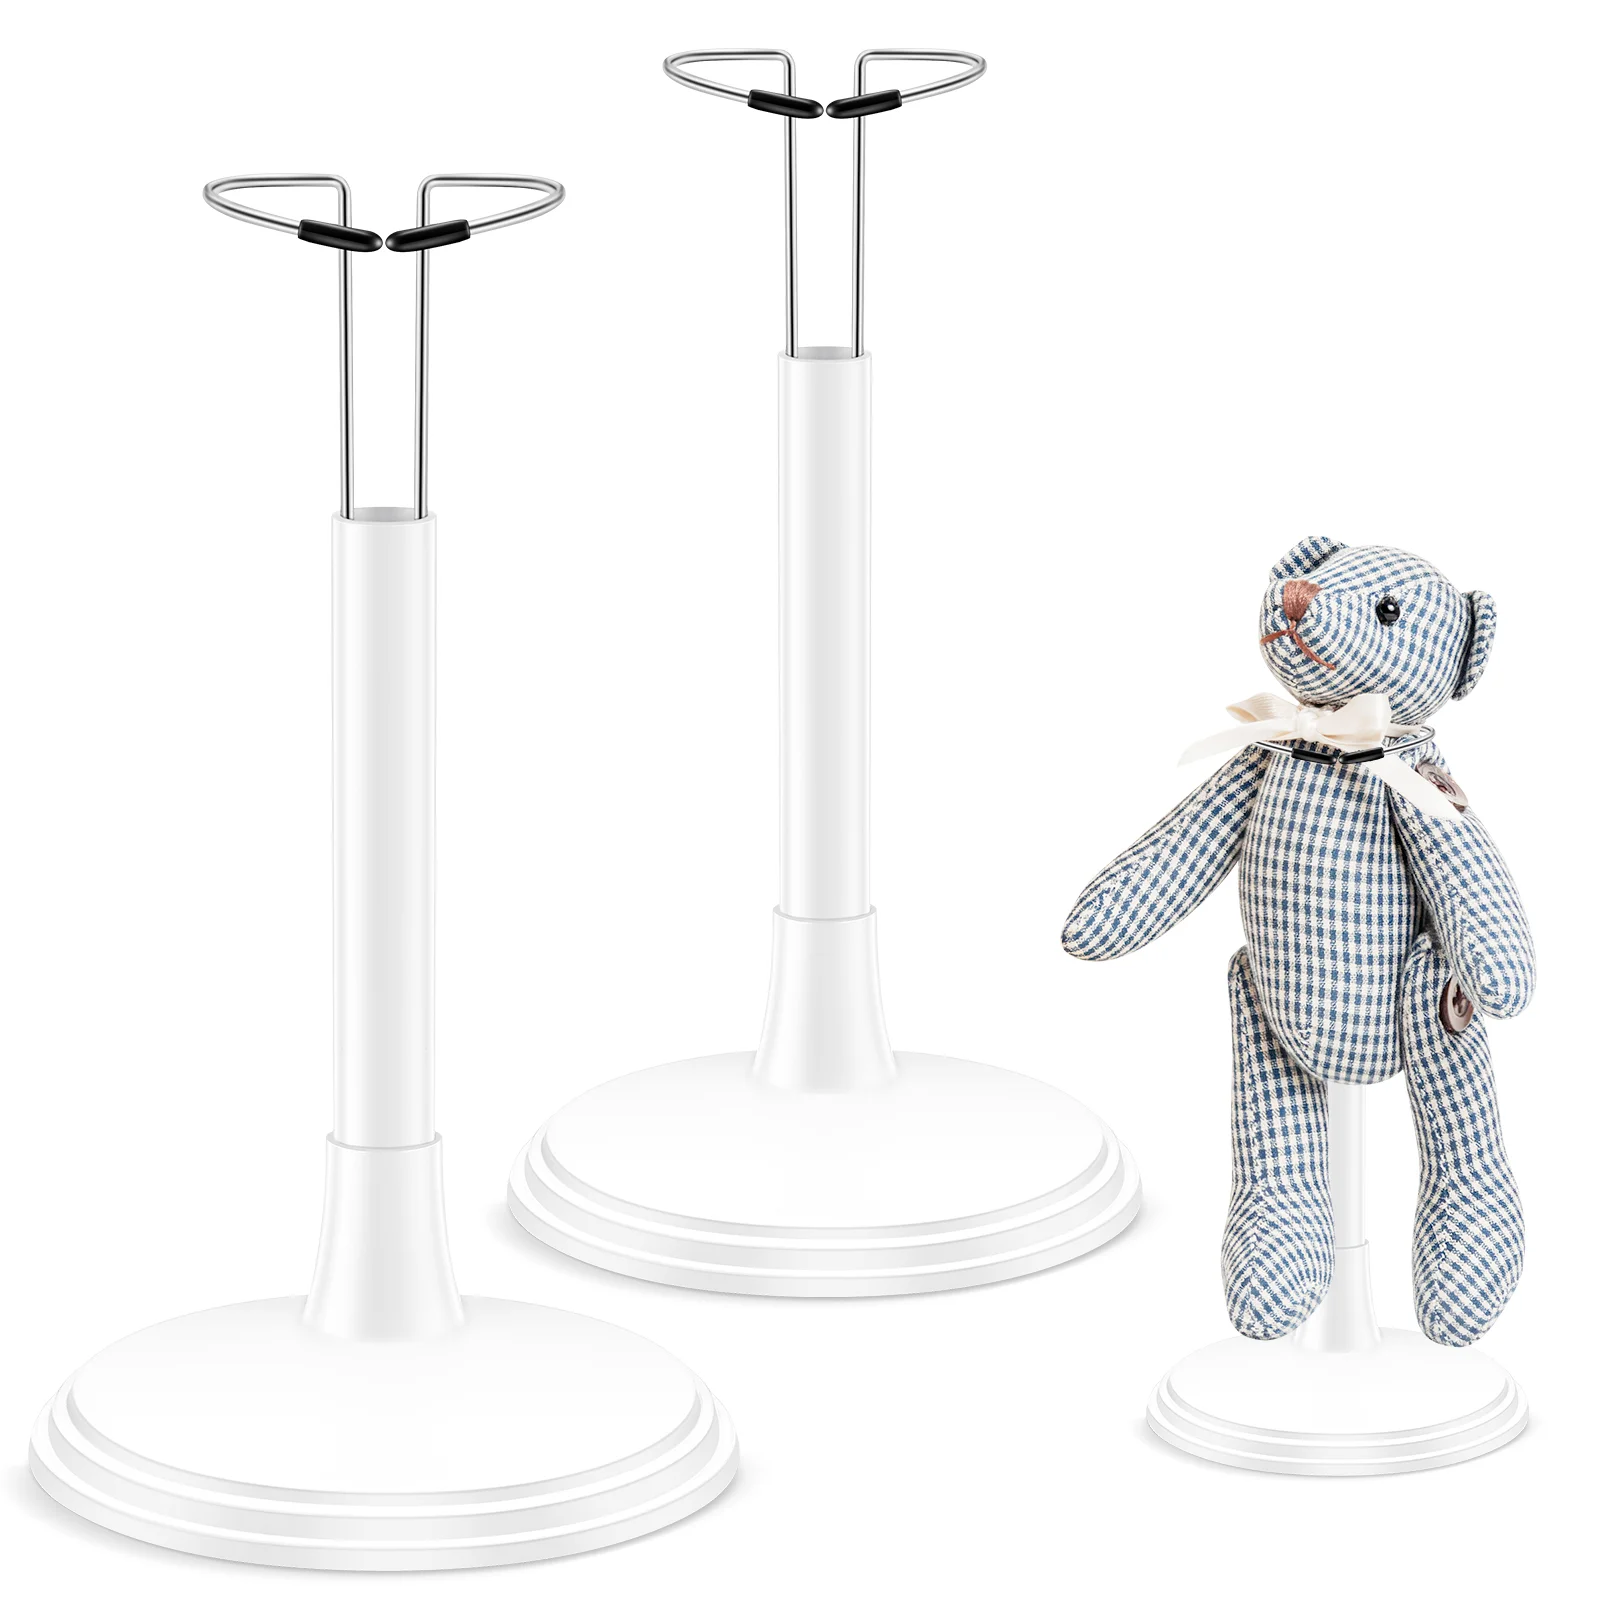 Adjustable Metal Doll Brackets Doll Support Stands Doll Puppet Wrist Stand Holder Dollhouse Display Accessories telescopic poster stands t type advertising racks metal display stands advertising display stand vertical telescopic support